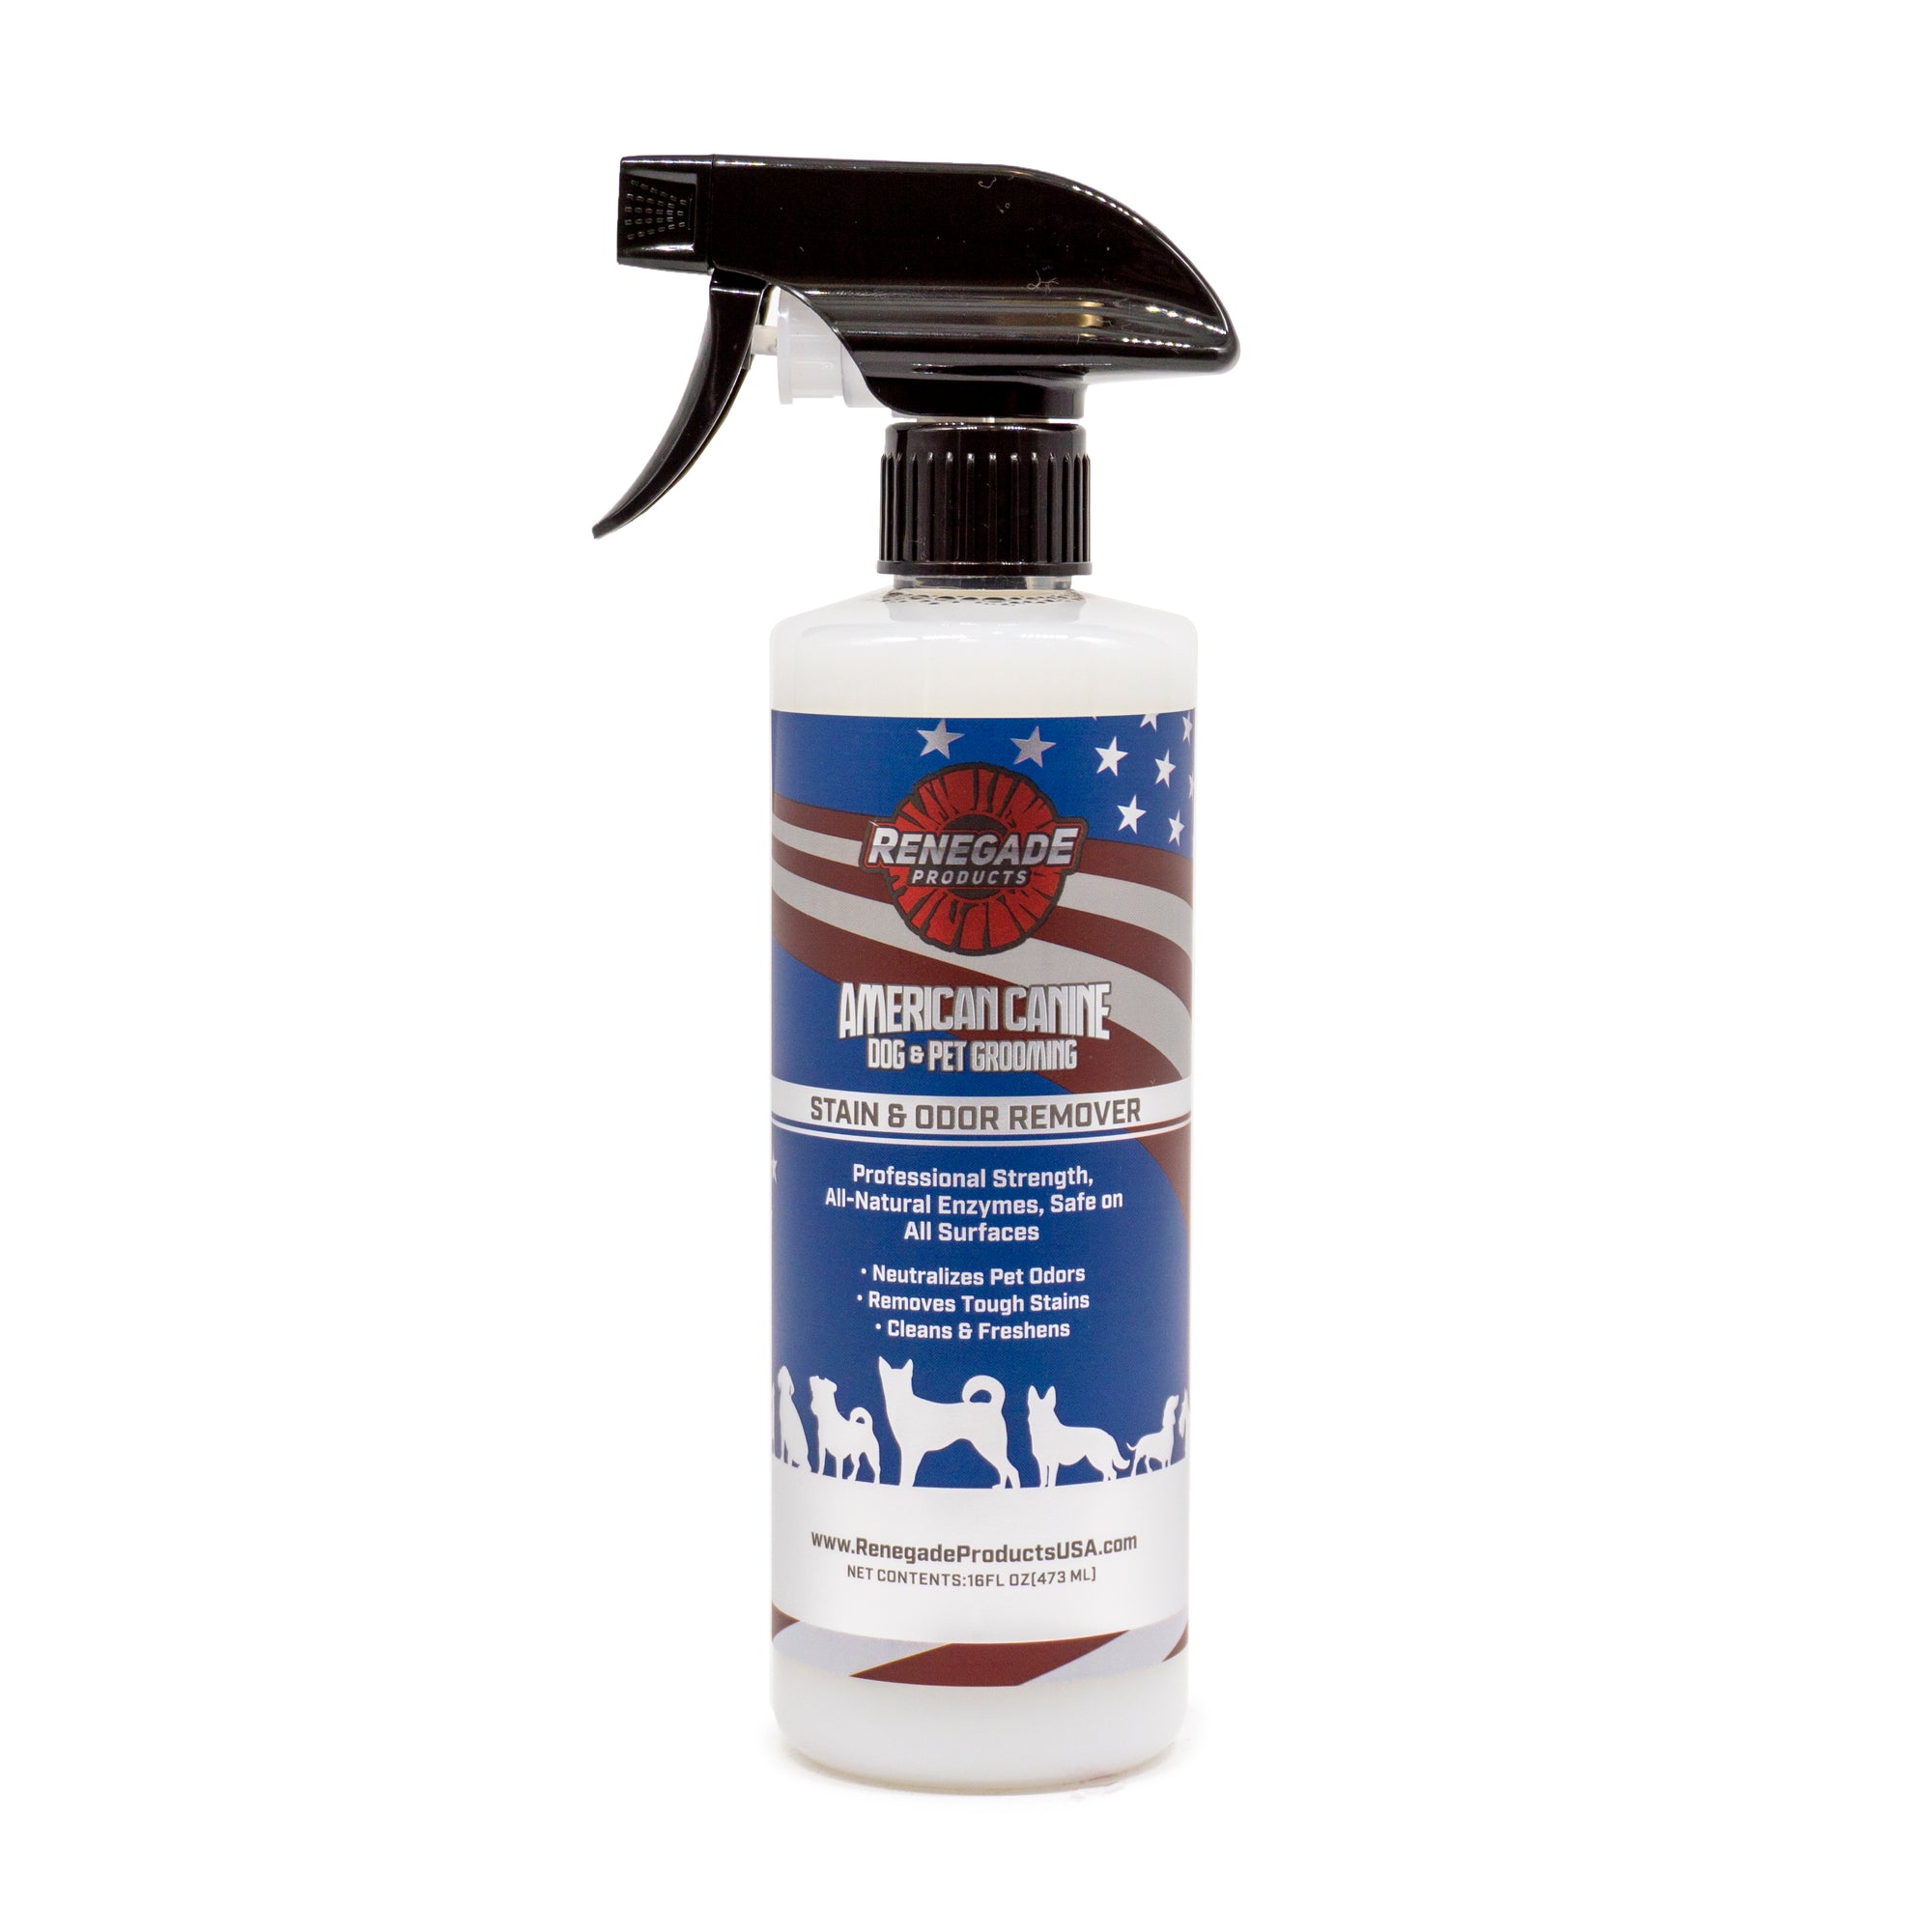 Renegade Products USA American Canine Professional Strength Stain & Odor Remover - Effective Solution for Pet Stain and Odor Removal